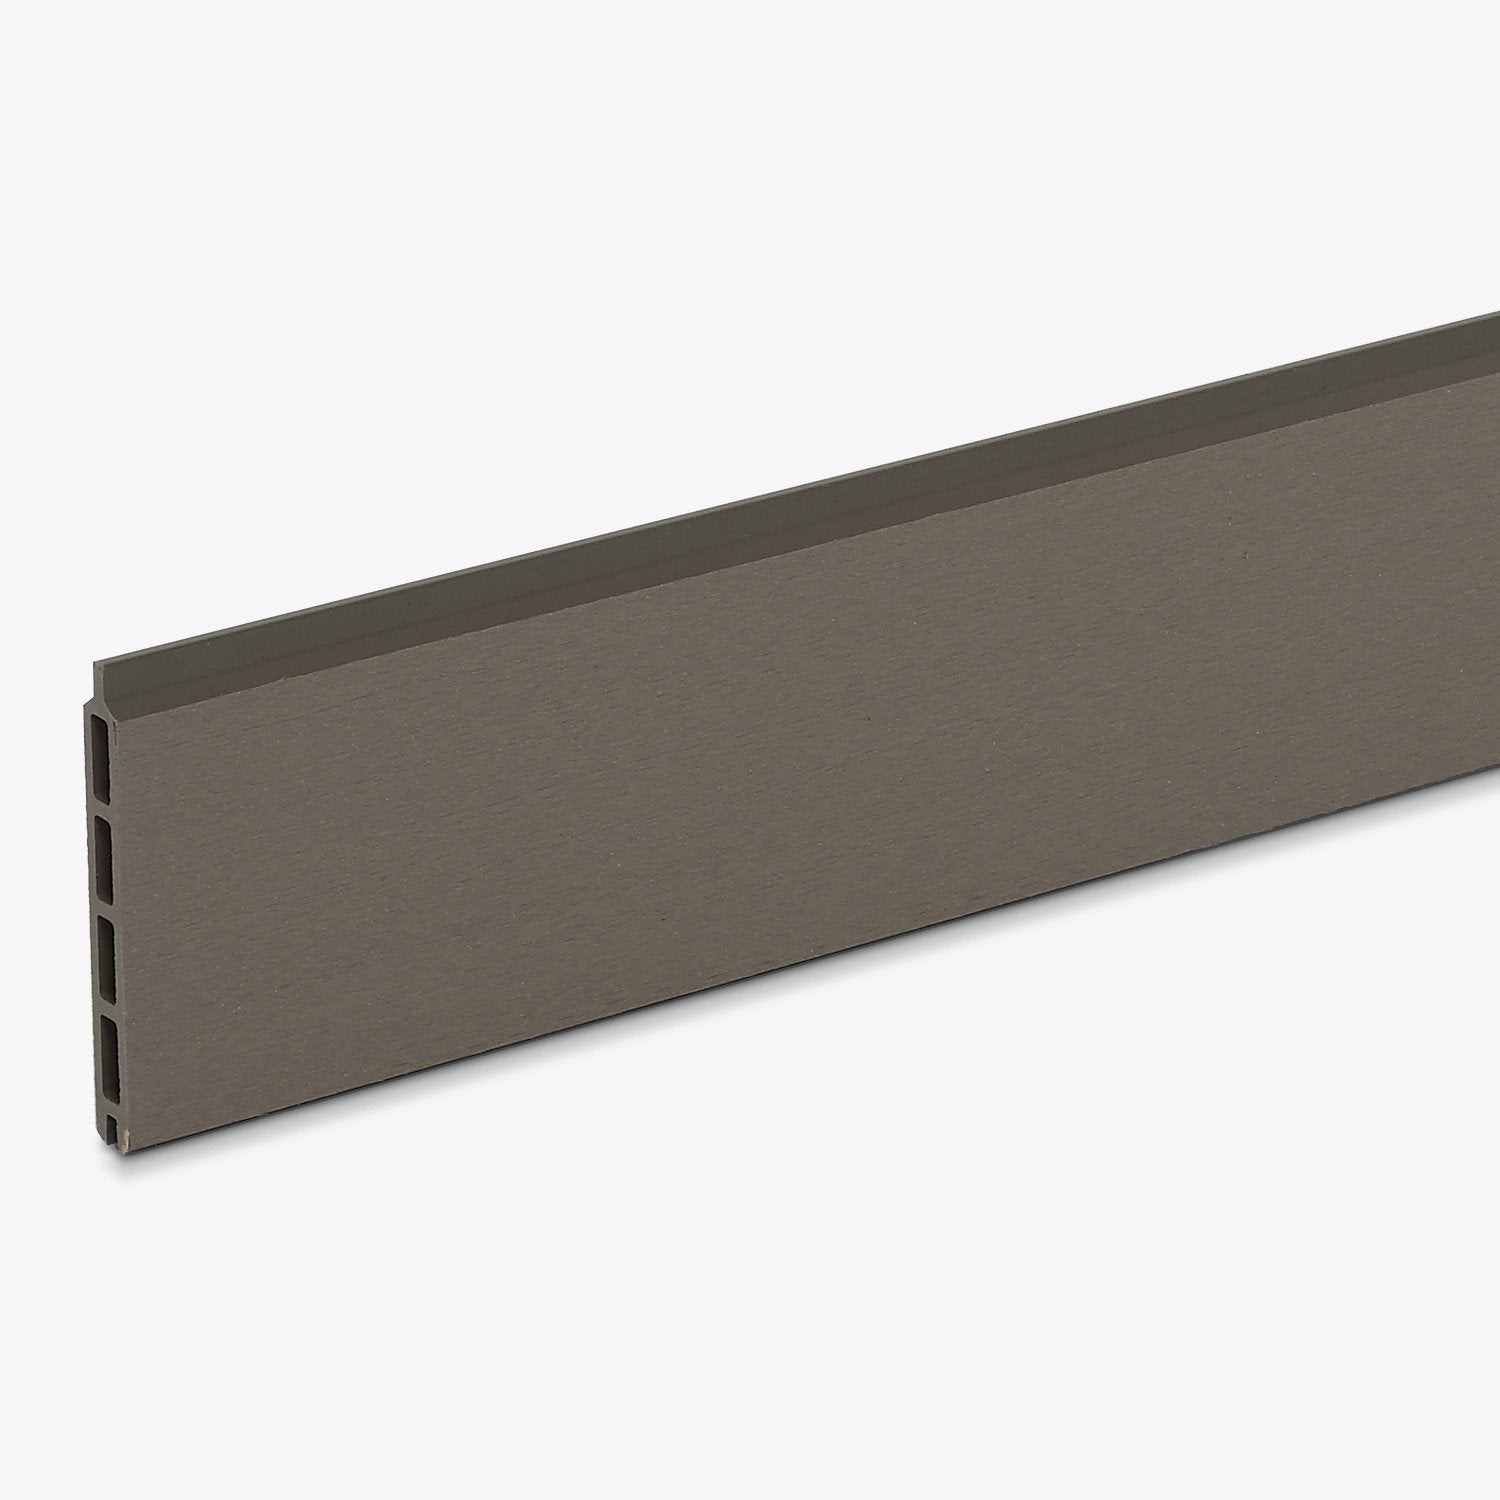 Hyperion composite fencing panel grey